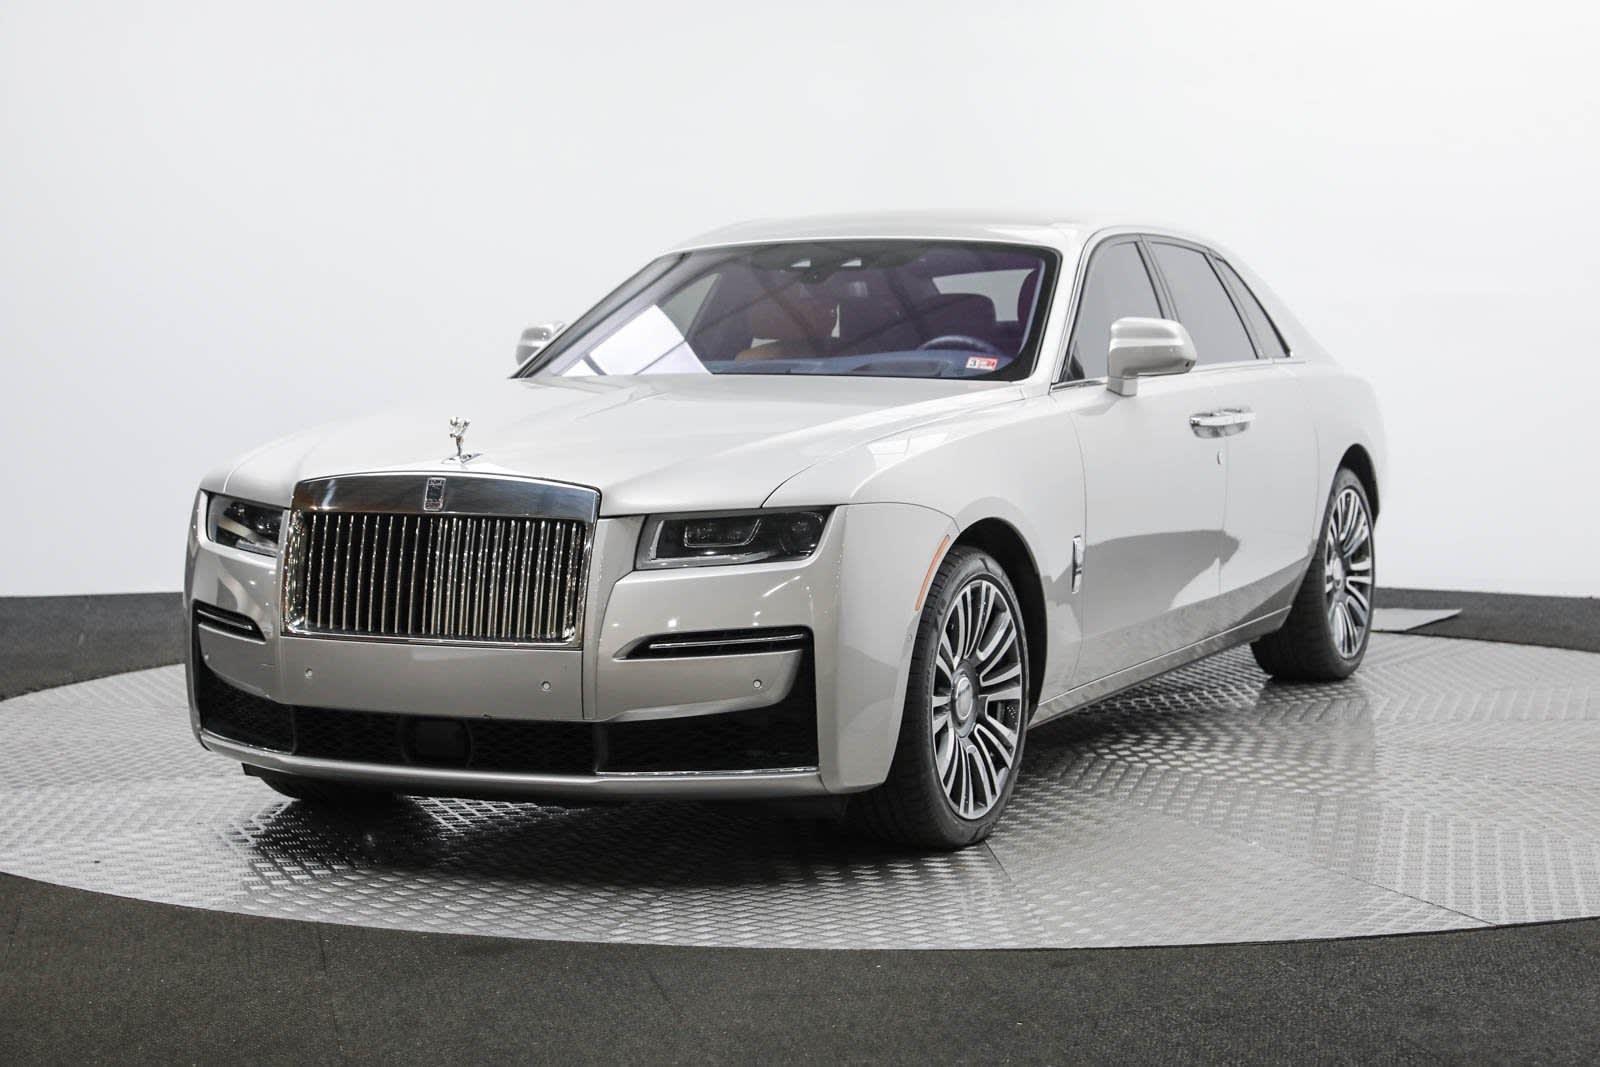 Used Rolls Royce for Sale in Toronto, ON